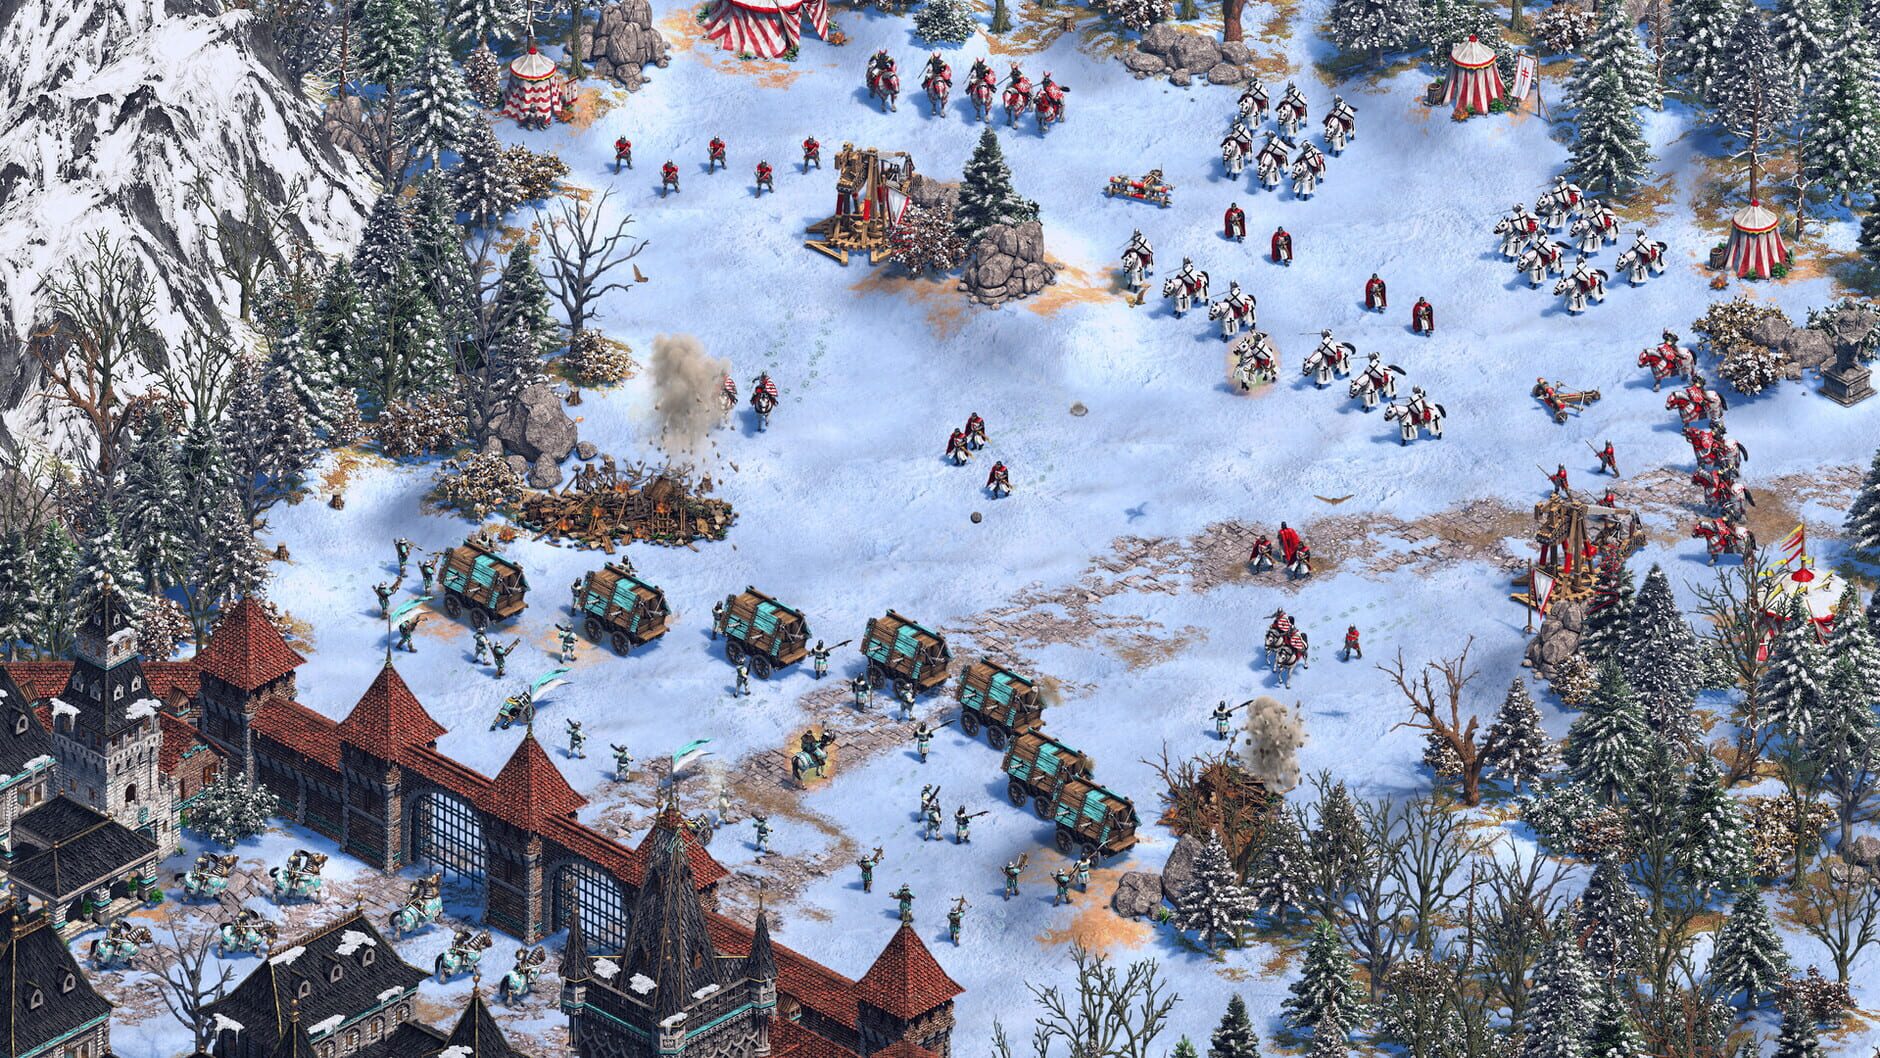 Screenshot for Age of Empires II: Definitive Edition - Dawn of the Dukes